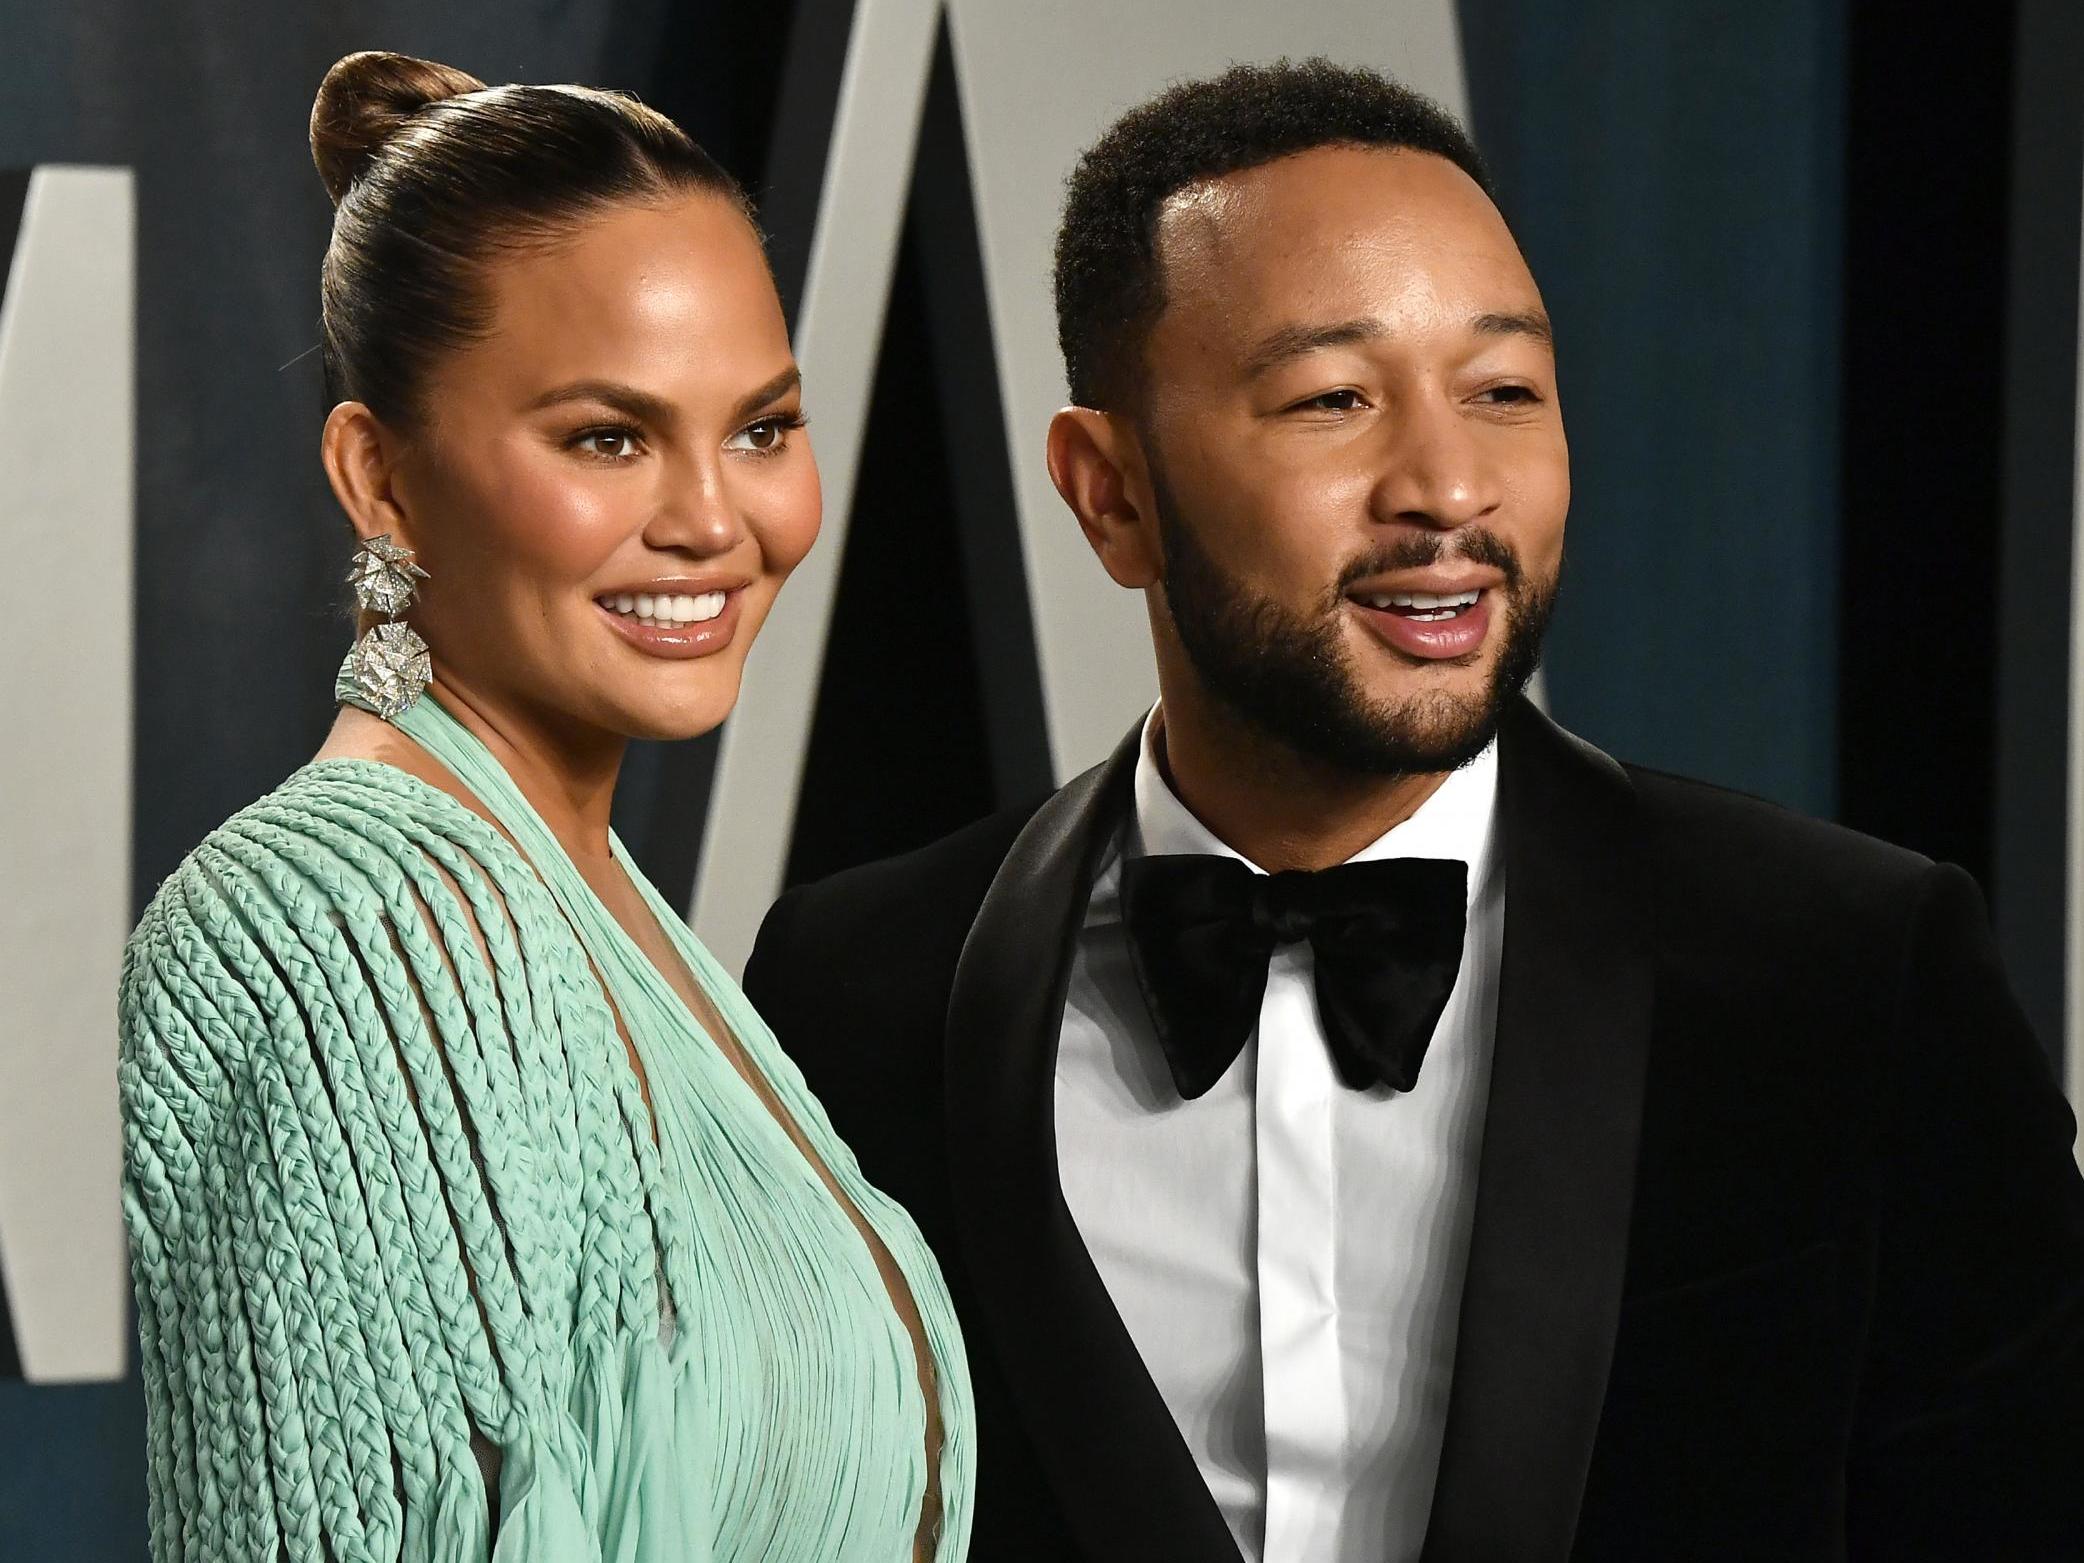 John Legend admits he previously cheated in past relationships before meeting wife Chrissy Teigen, wholm he's been married to since 2013